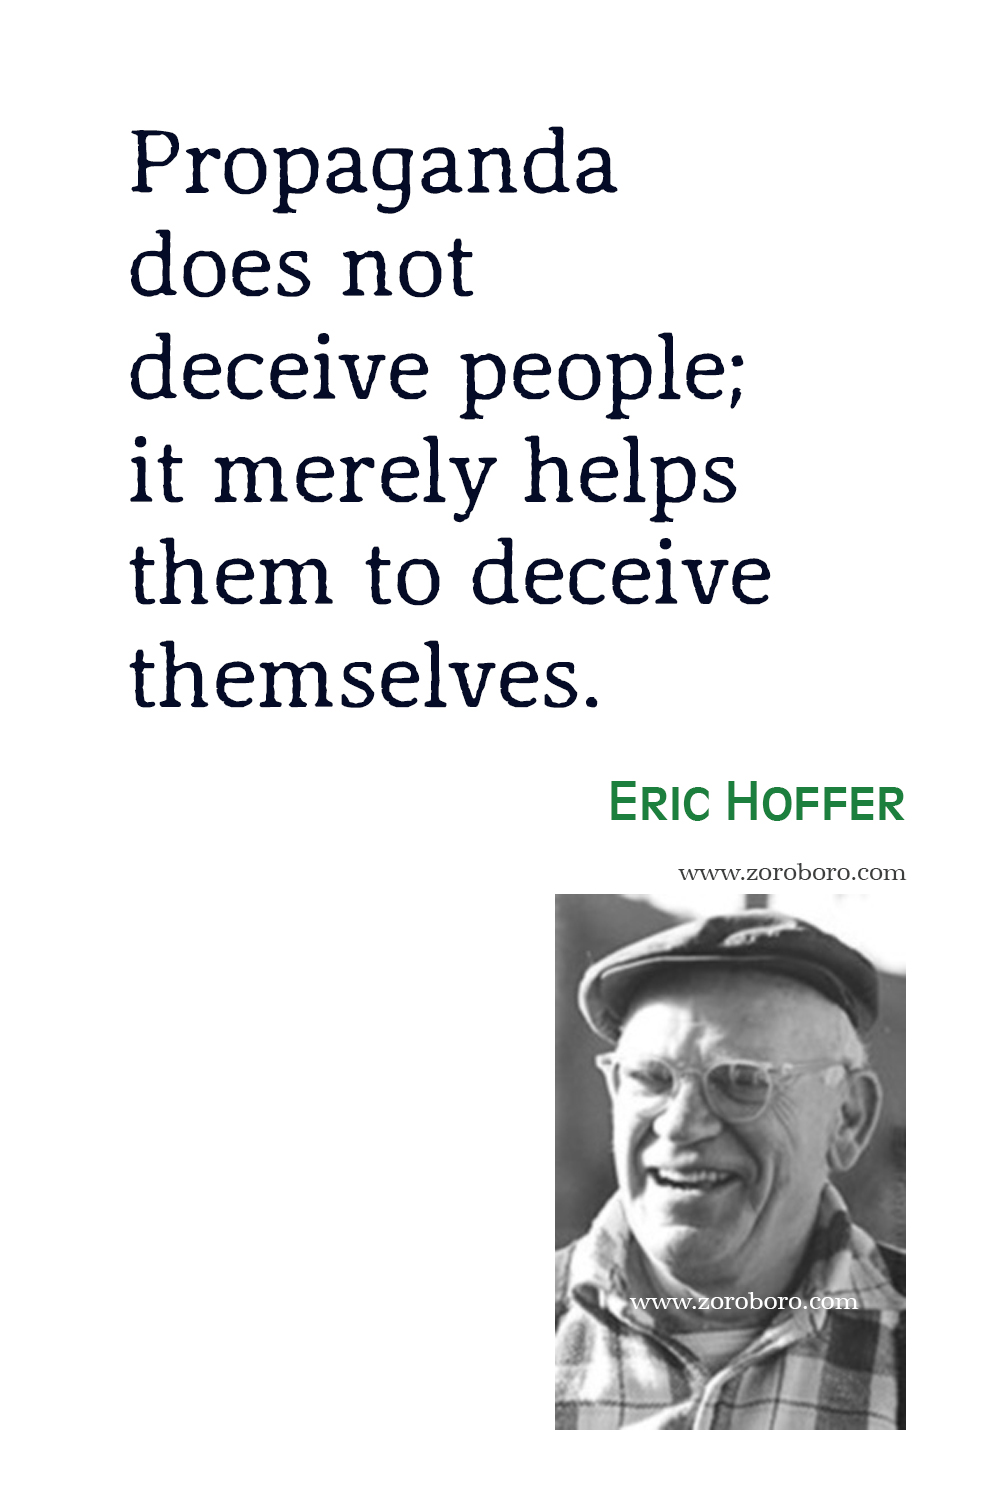 Eric Hoffer Quotes, Eric Hoffer The True Believer Quotes, Eric Hoffer The Passionate State of Mind Quotes, Eric Hoffer Books, Eric Hoffer The Loudest When We.